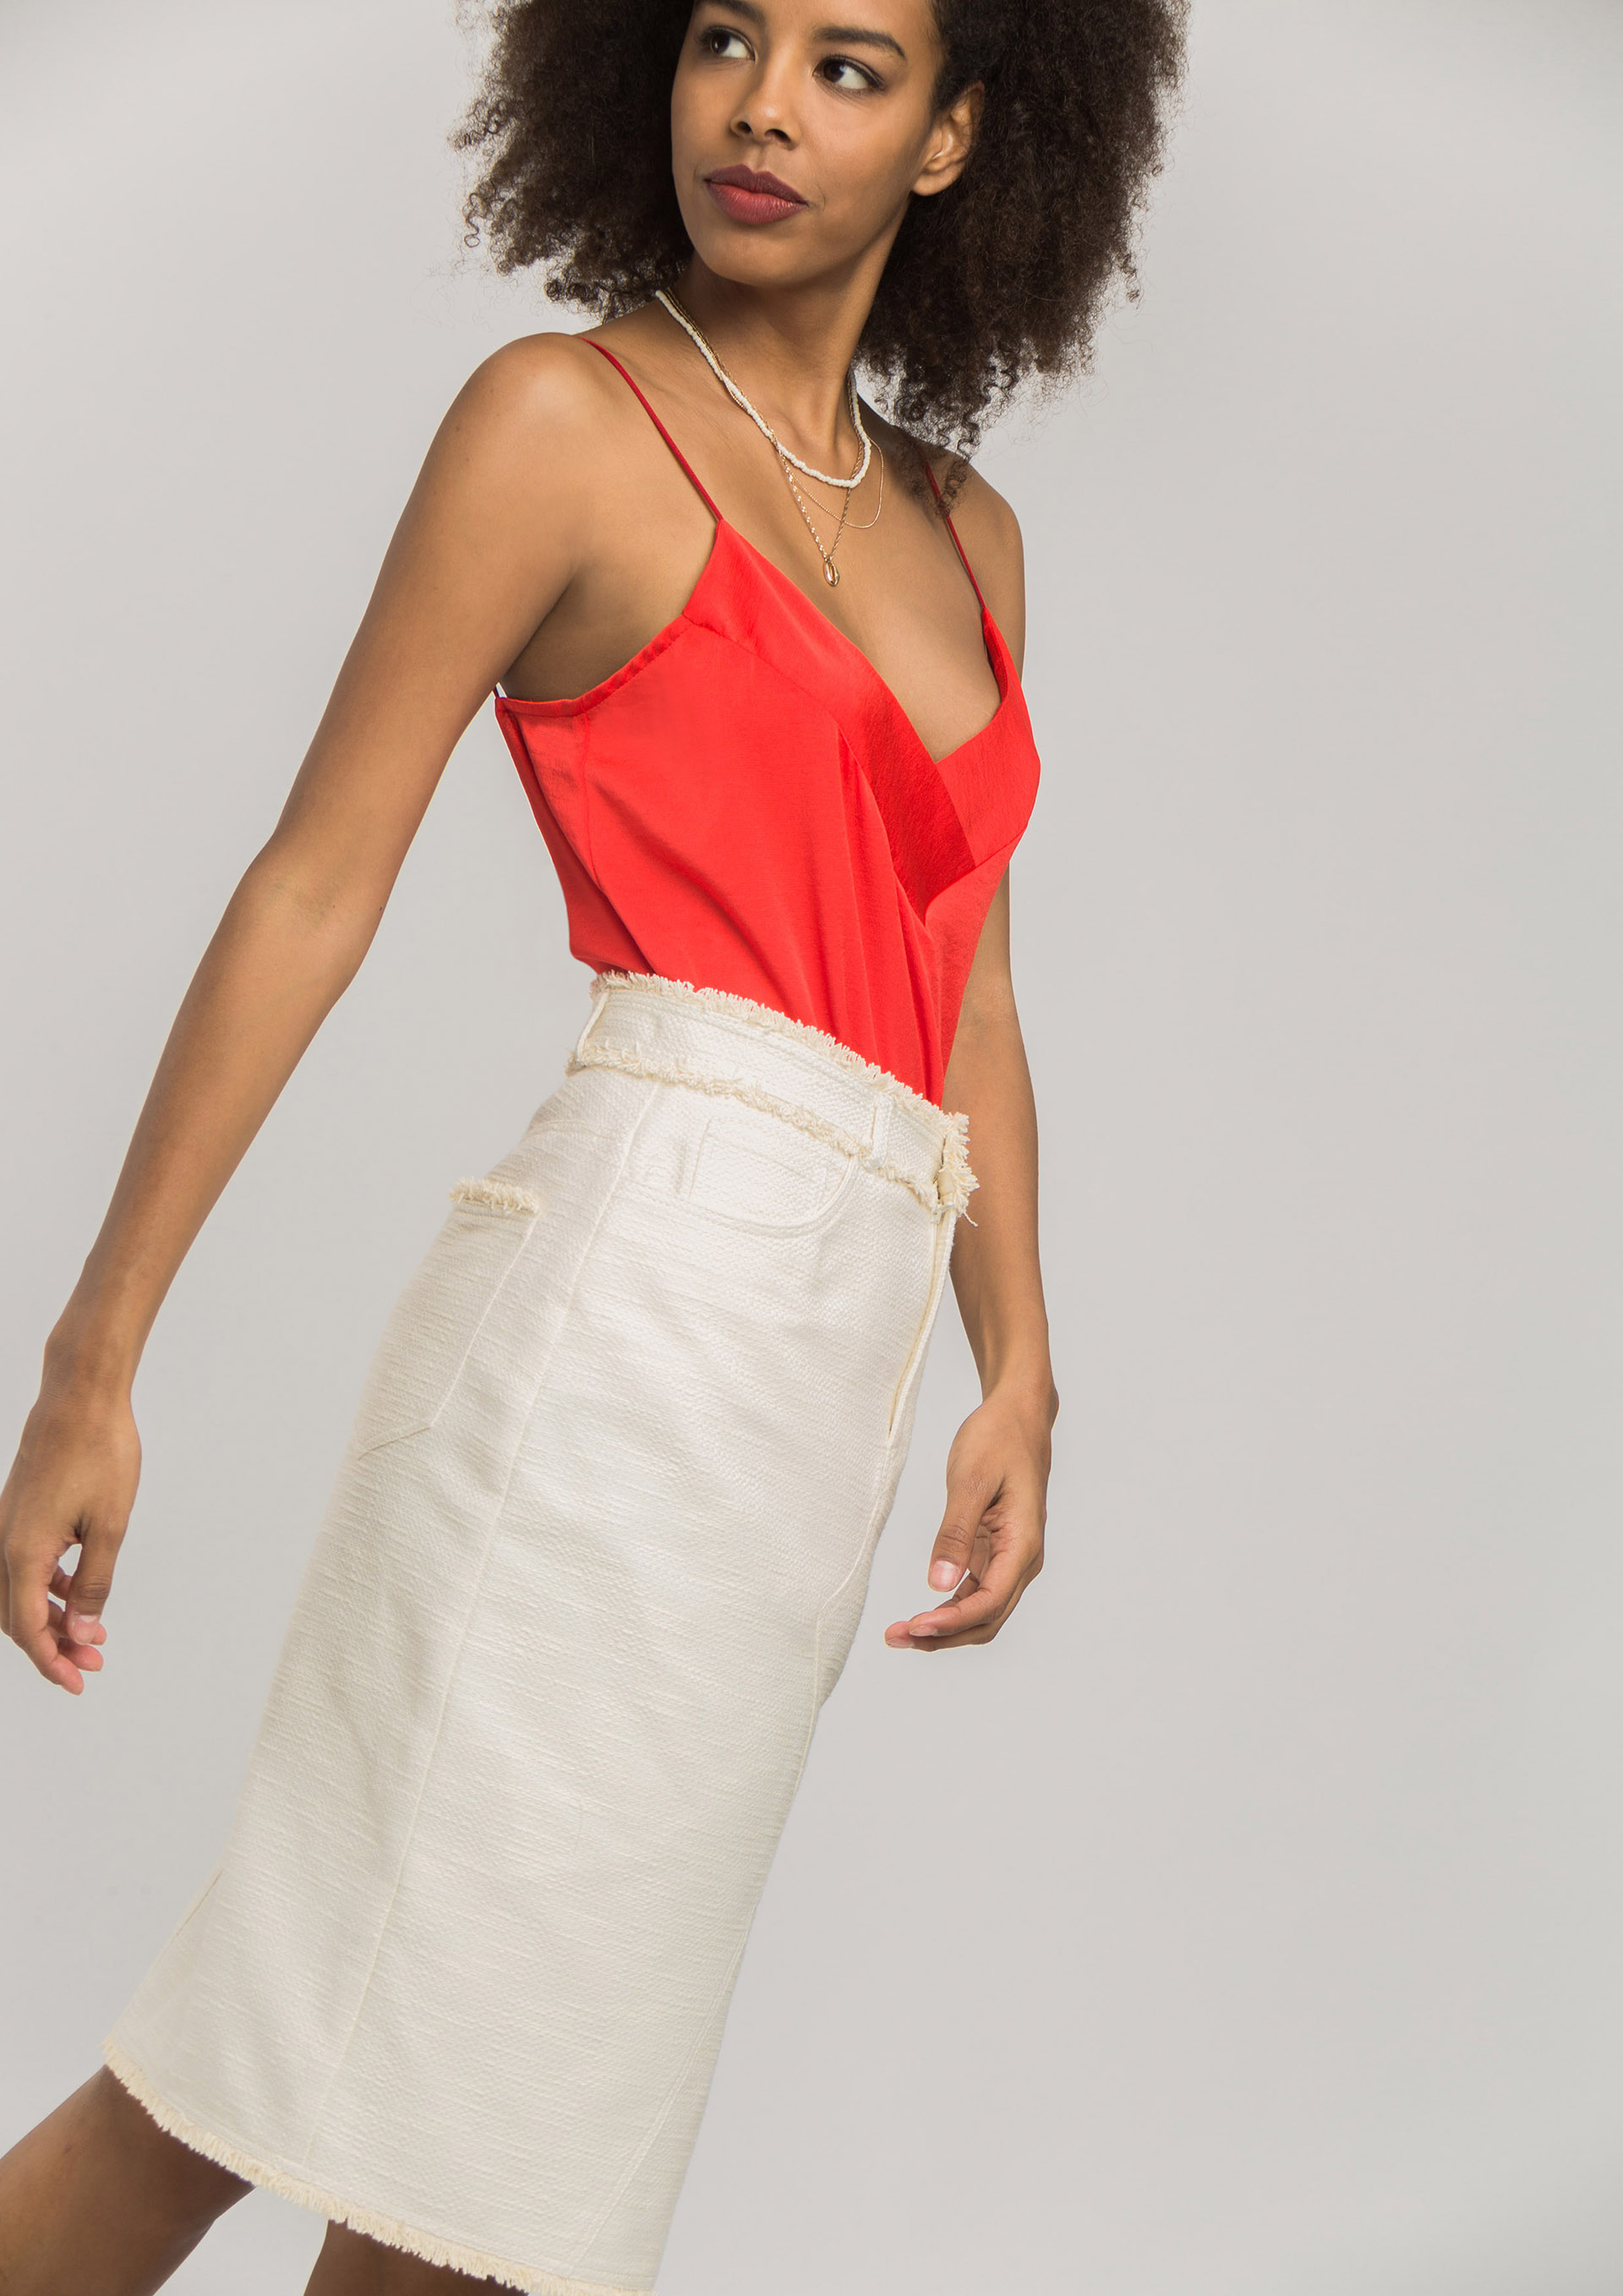 Red camisole top